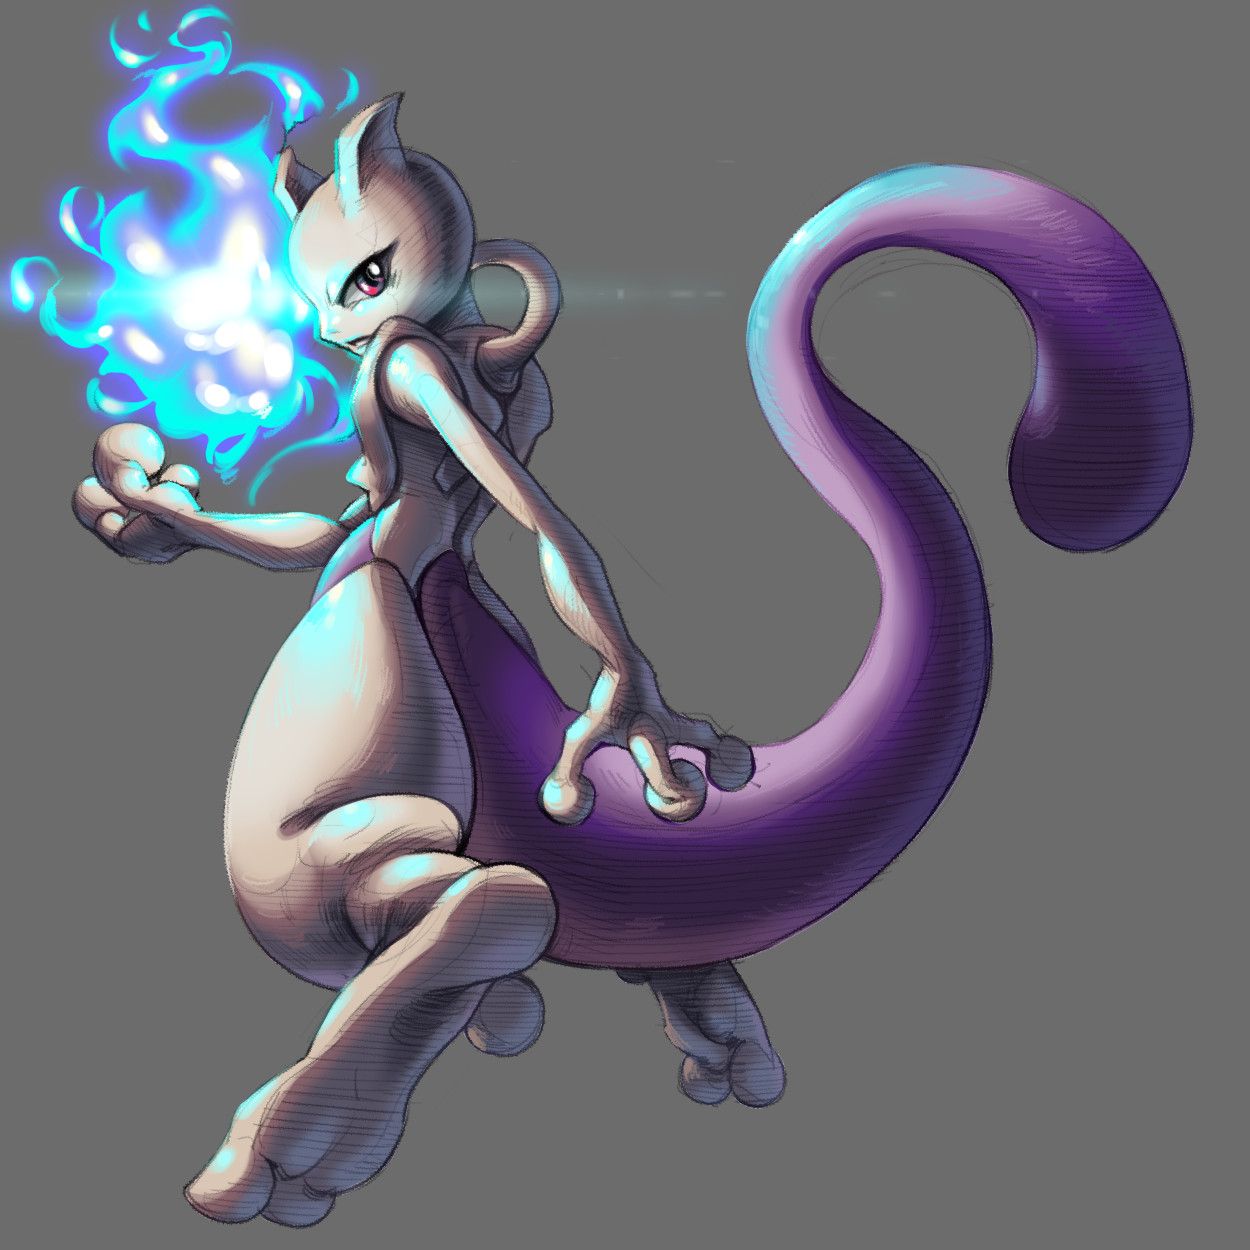 Pokémon 10 Superpowers Only Super Fans Know Mewtwo Has (And 10 Weaknesses)